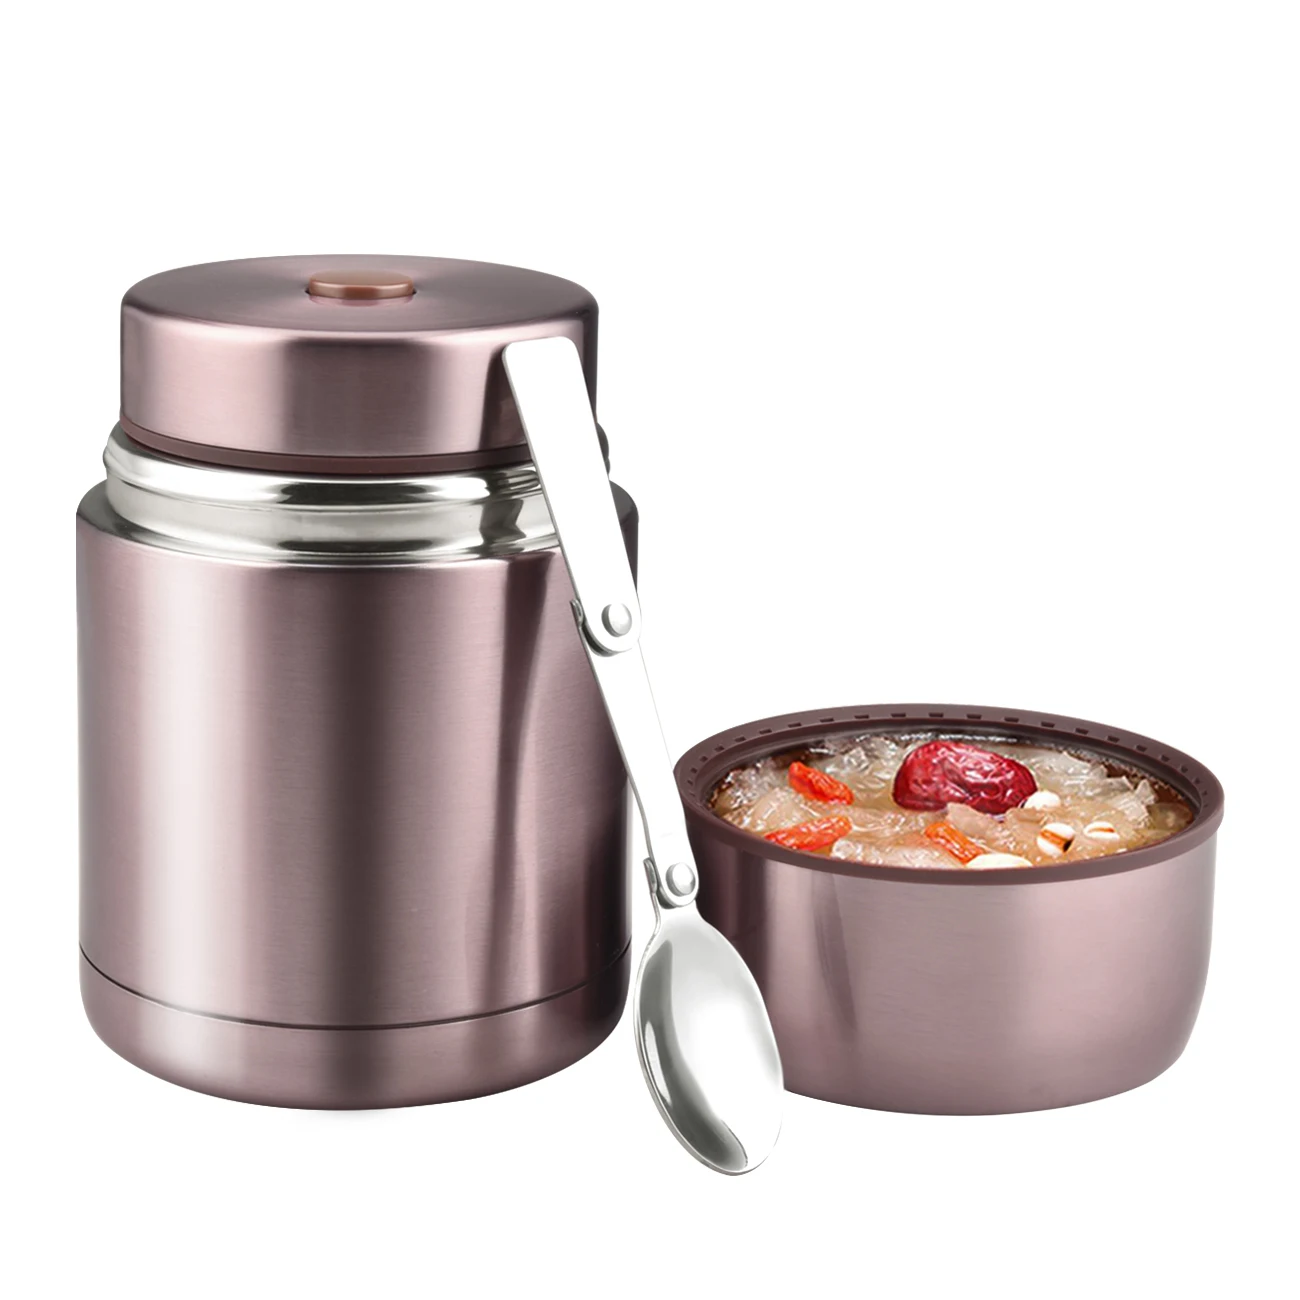 https://ae01.alicdn.com/kf/H06ccd64ac193478da3abec4f6e5f6ab4j/800ml-Stainless-Steel-Food-Jar-Soup-Container-with-Foldable-Spoon-Double-Wall-Vacuum-Insulated-Thermos-for.jpg